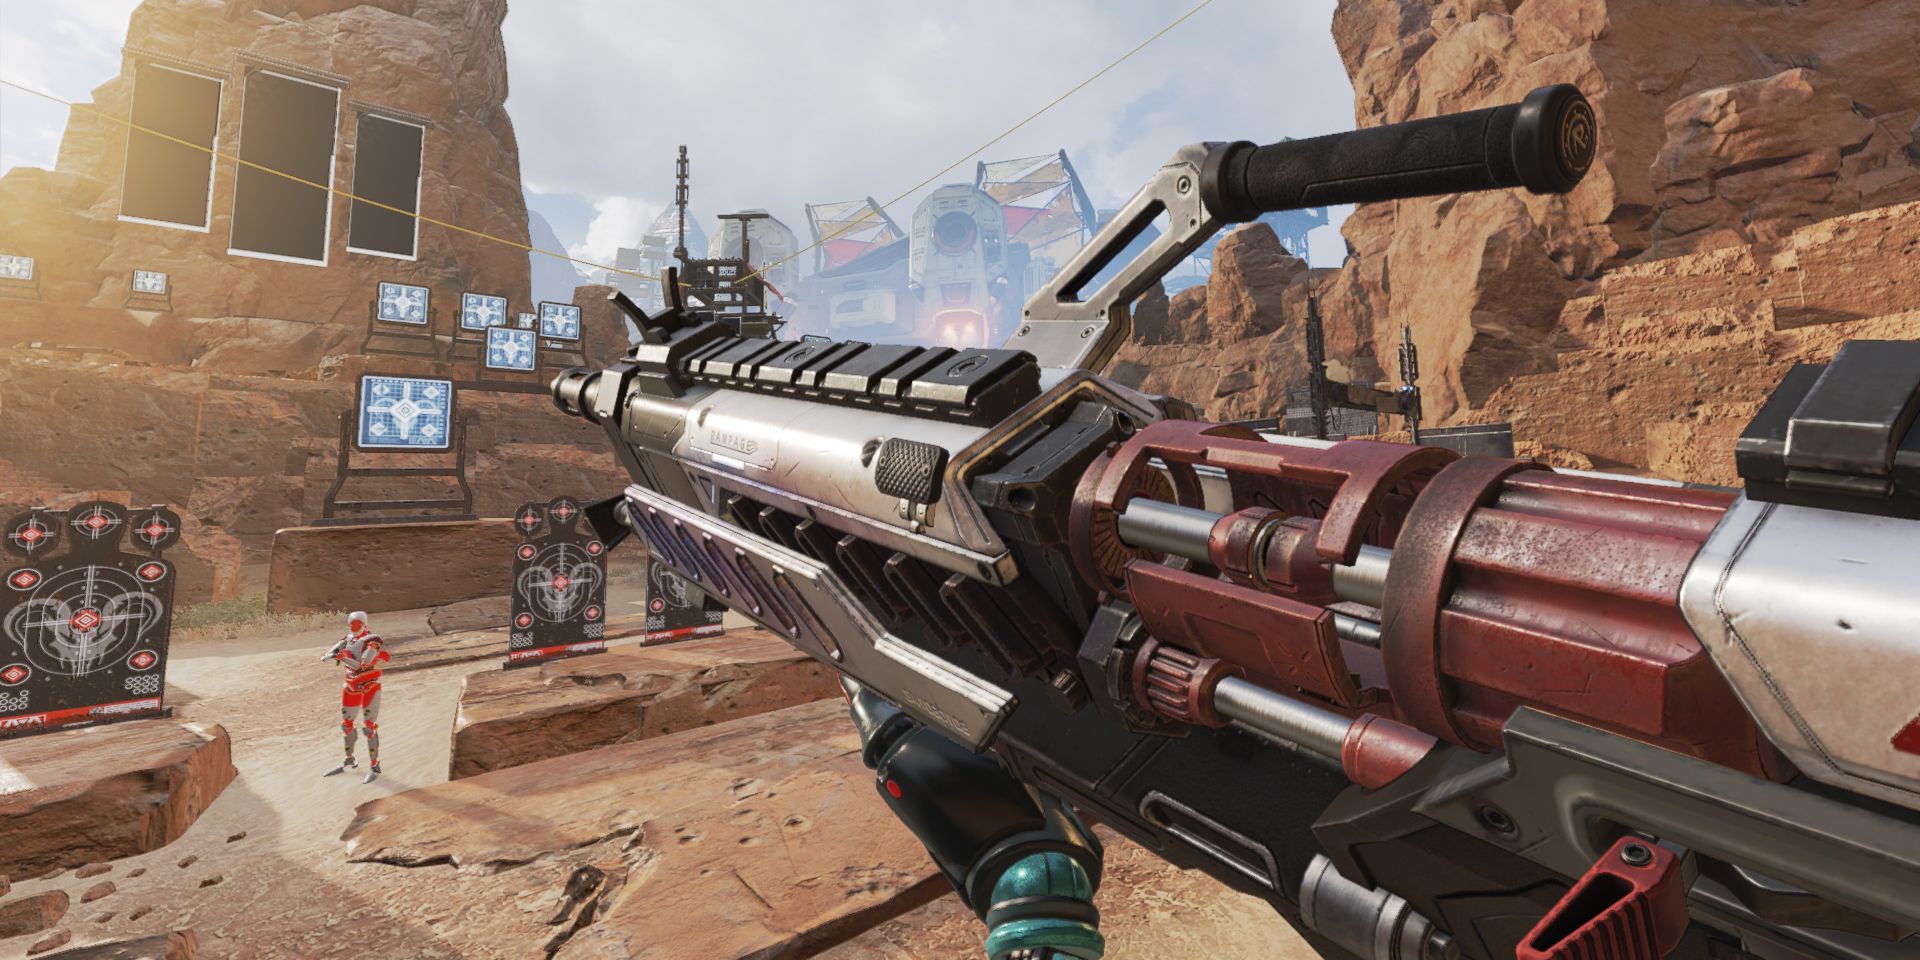 The Rampage LMG inside the Firing Range in Apex Legends